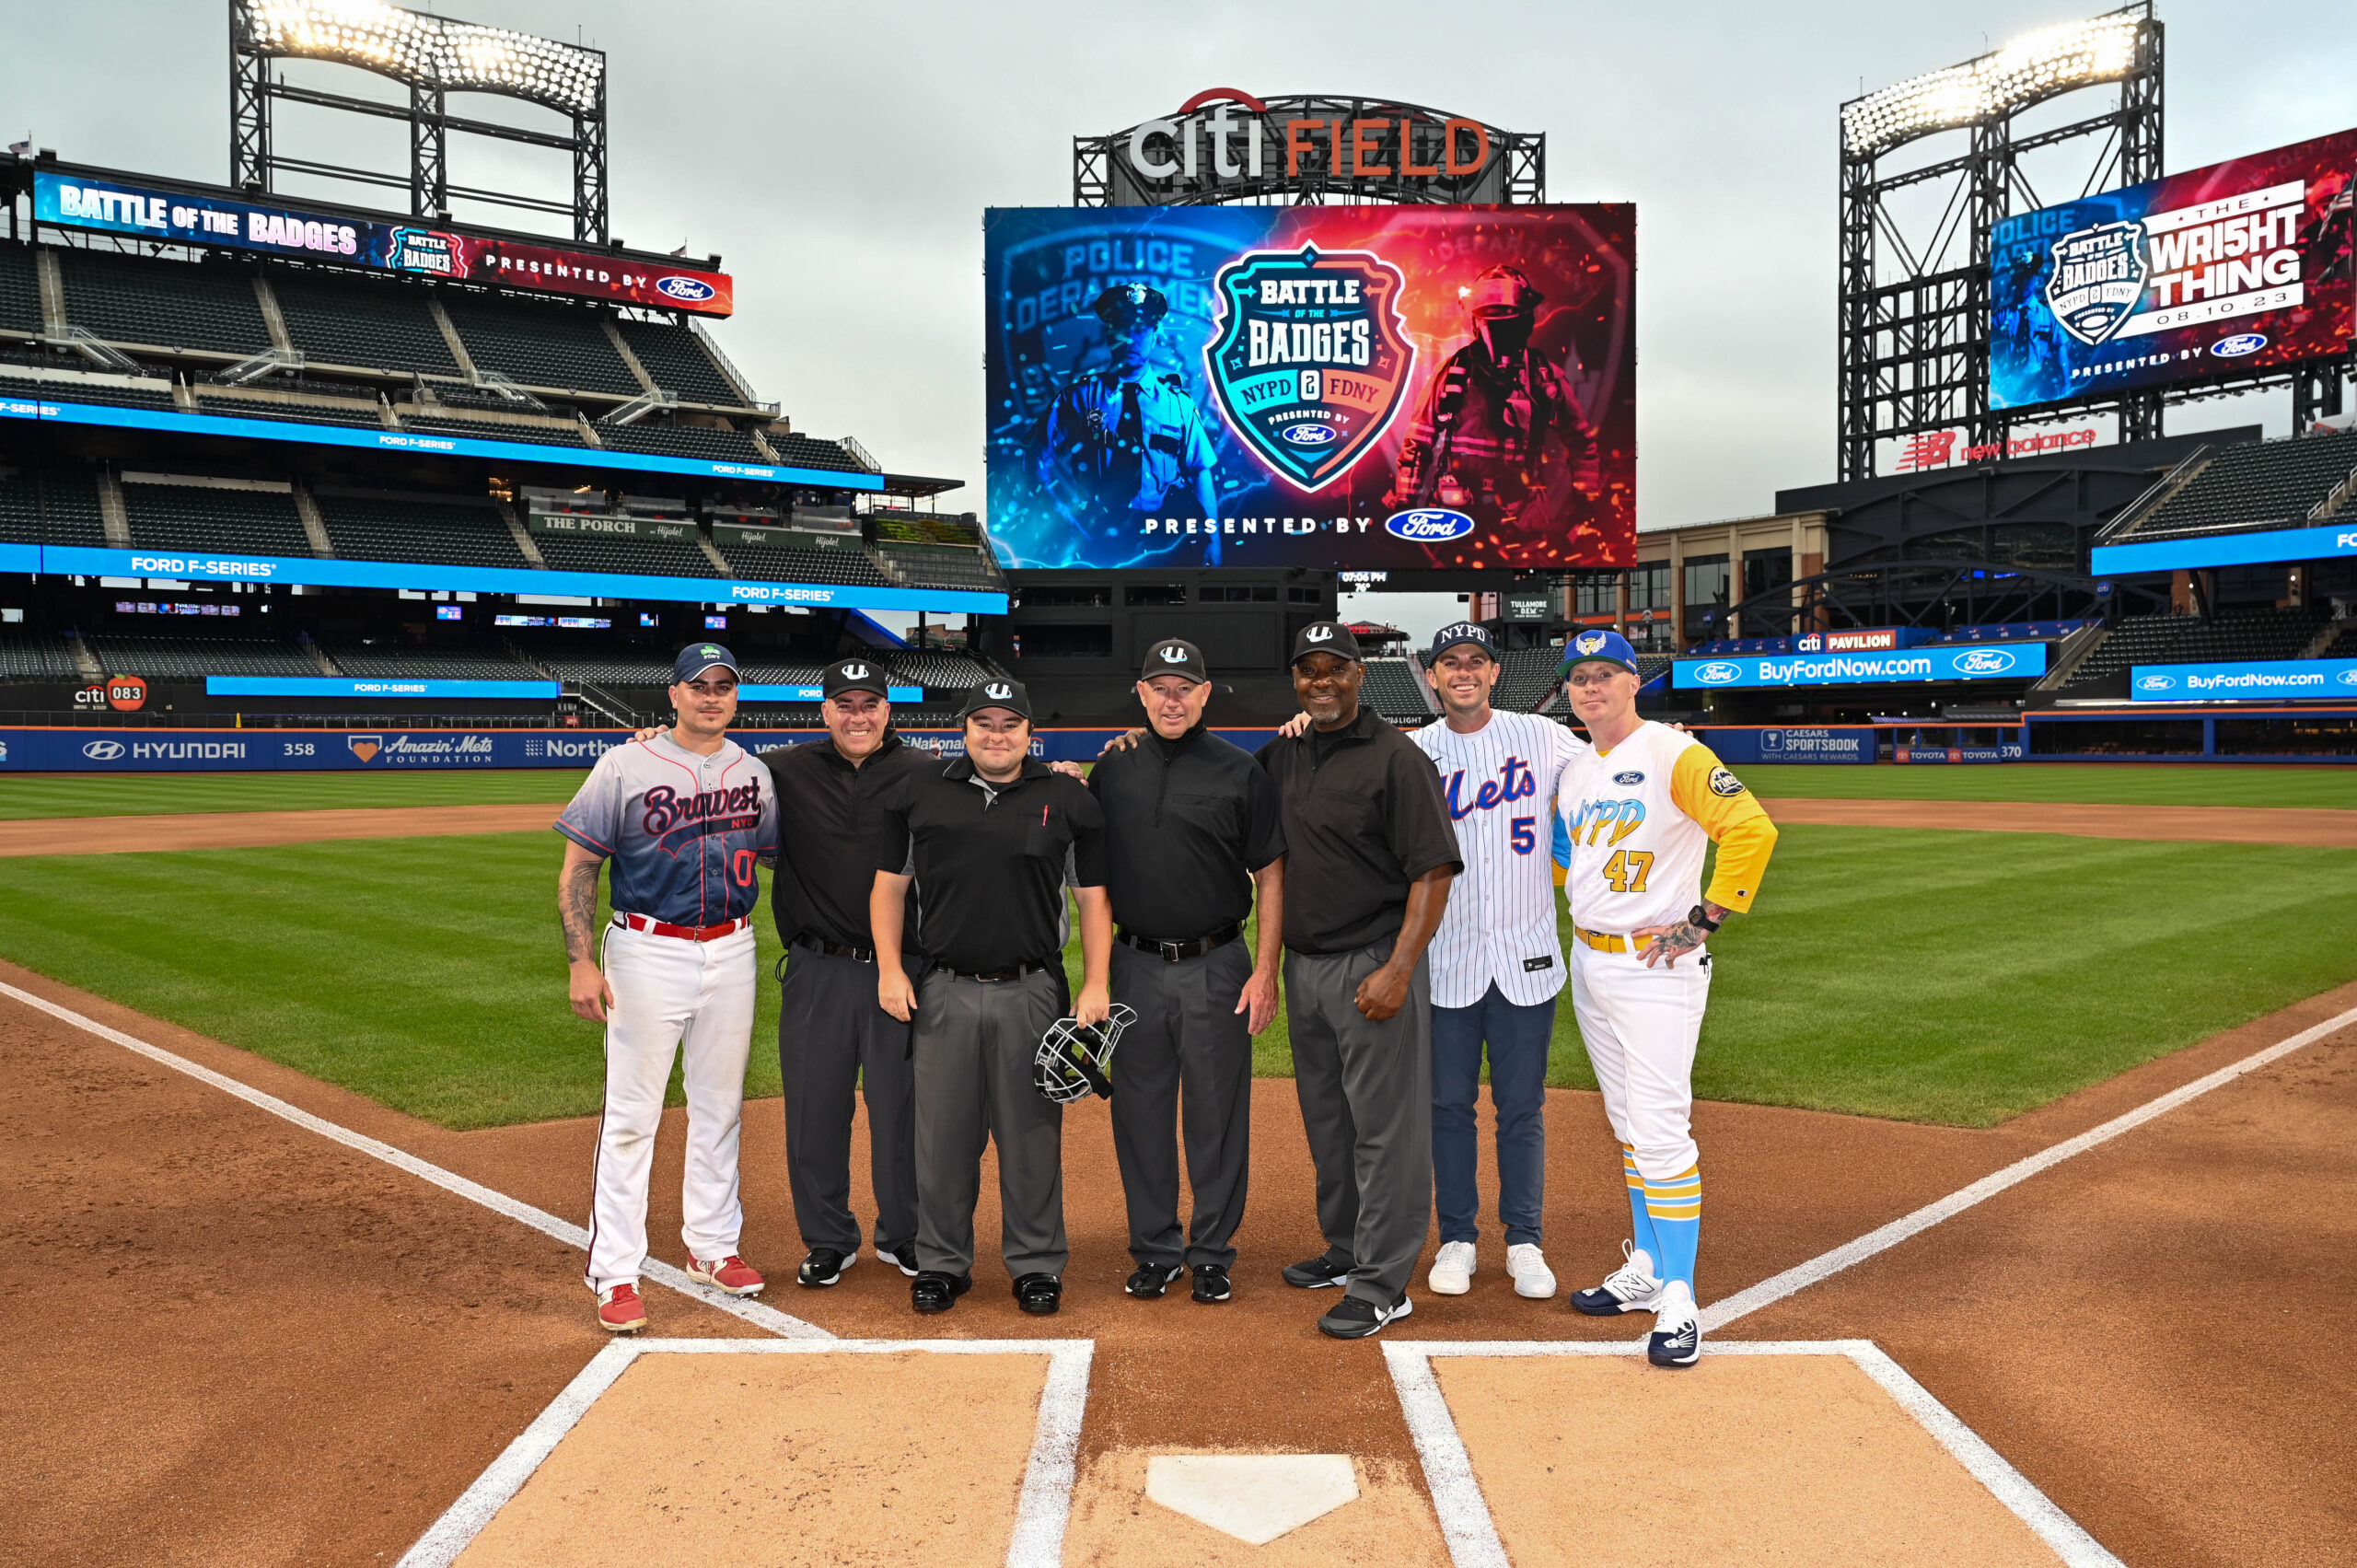 Mets celebrate Amazin' past with Old Timers' Day at Citi Field